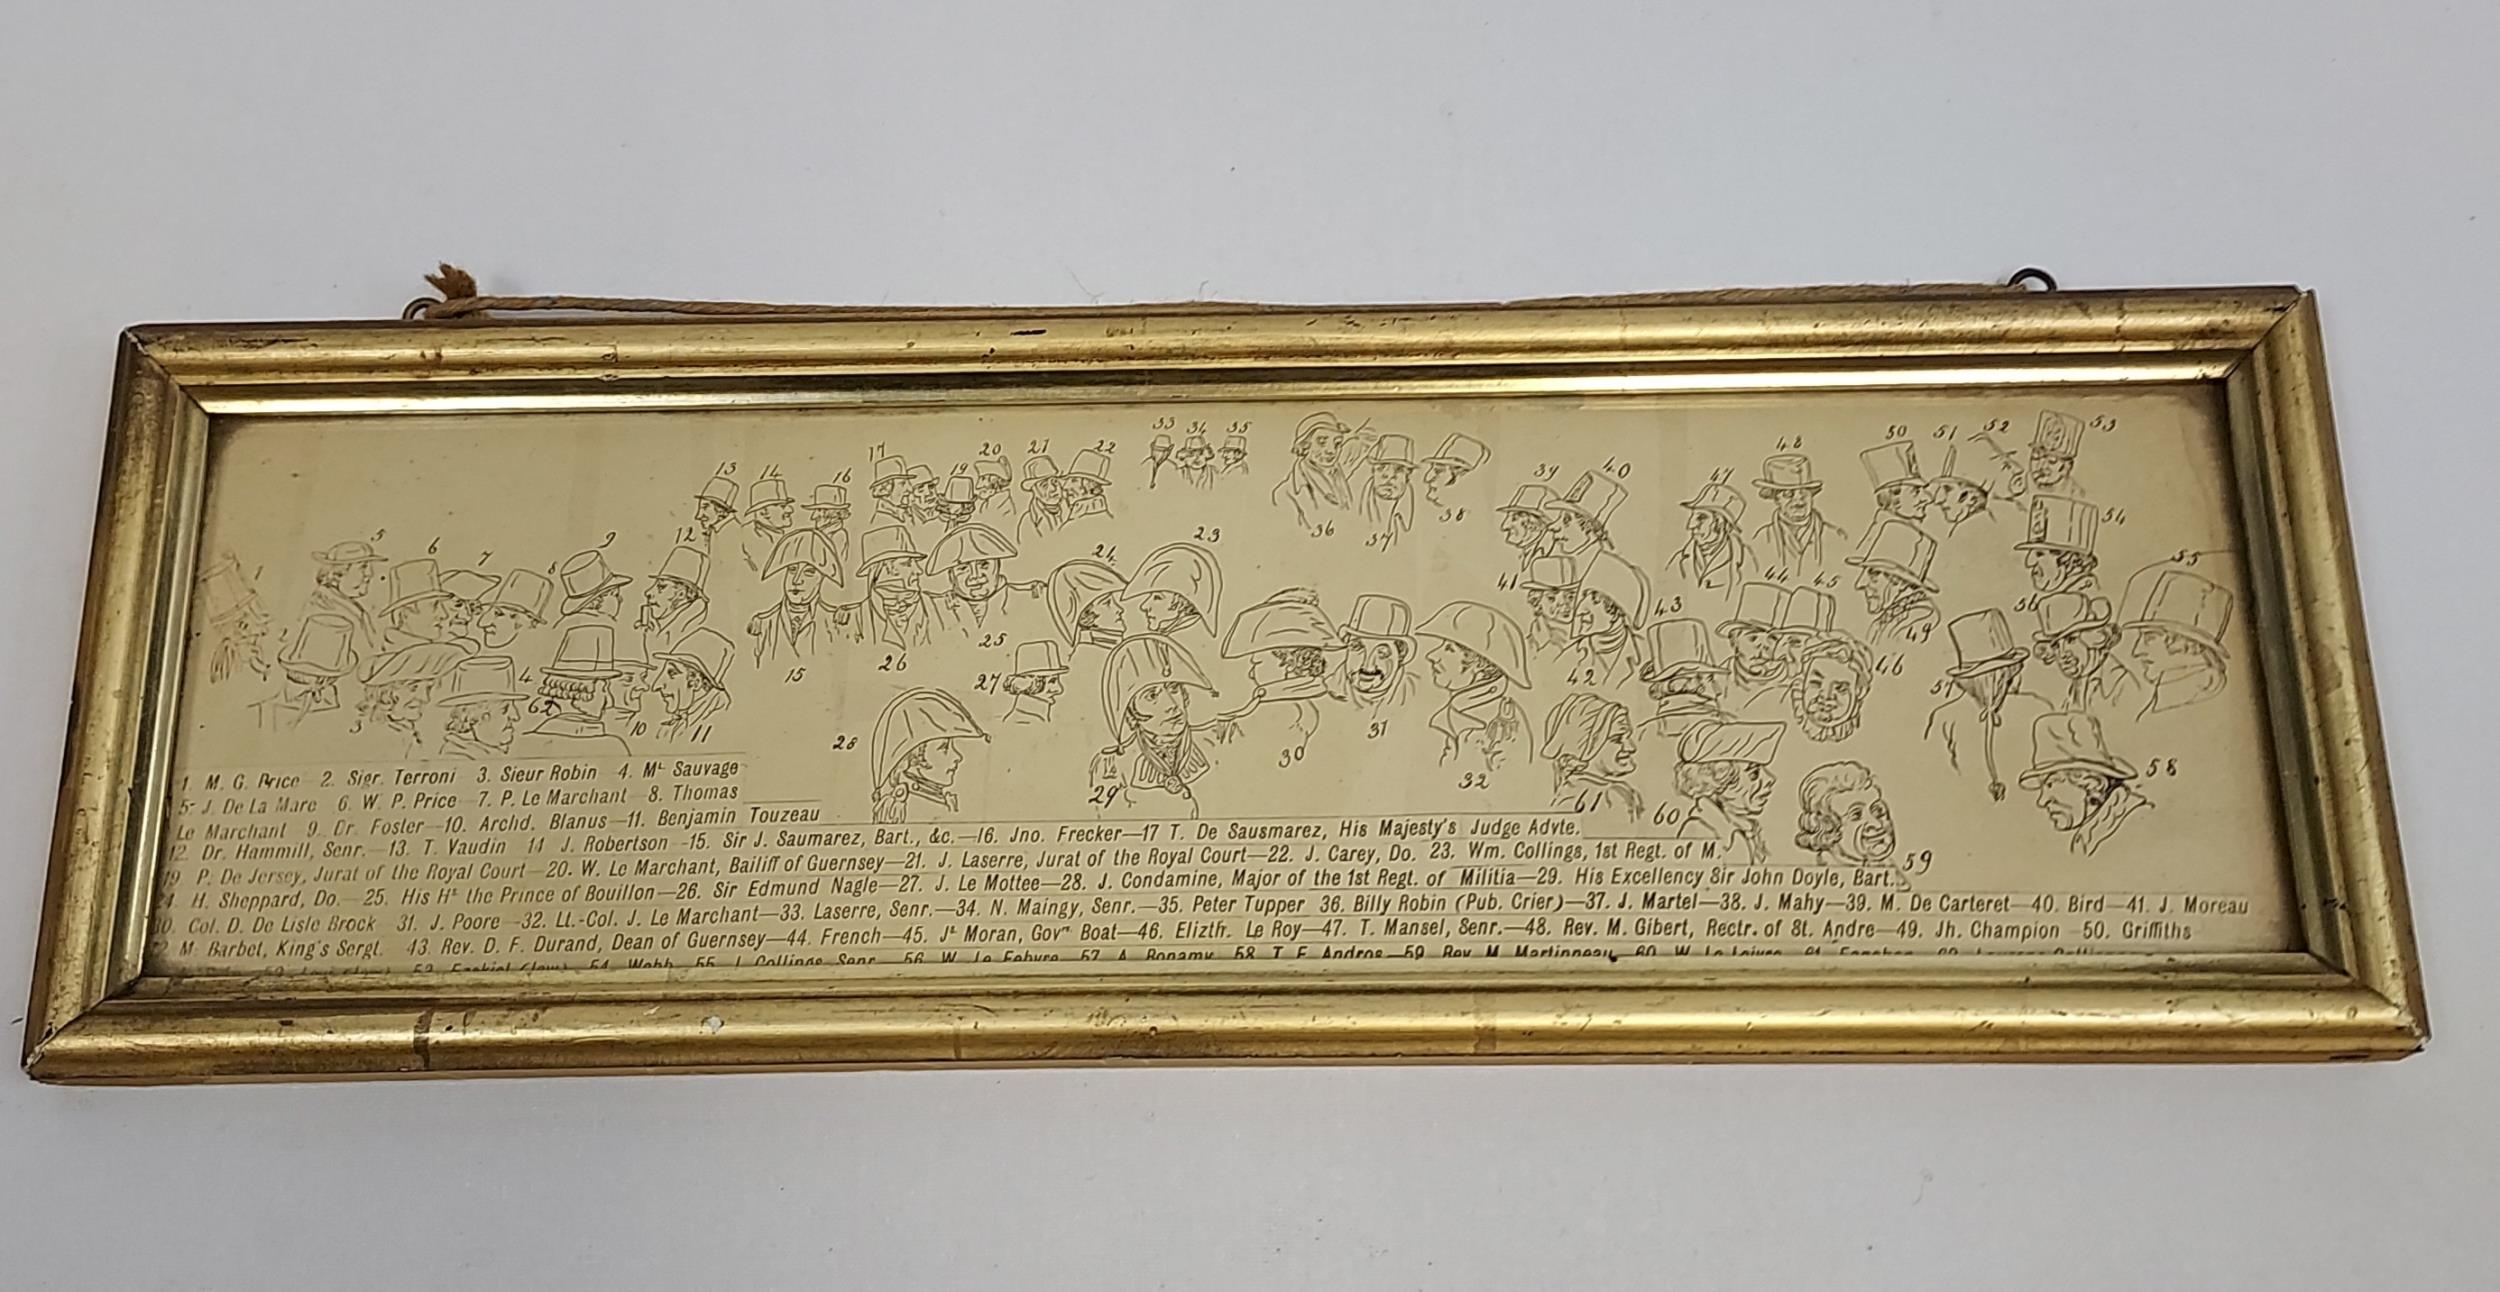 Antique print depicting various characters with key to people showed within the print. [14x42cm]